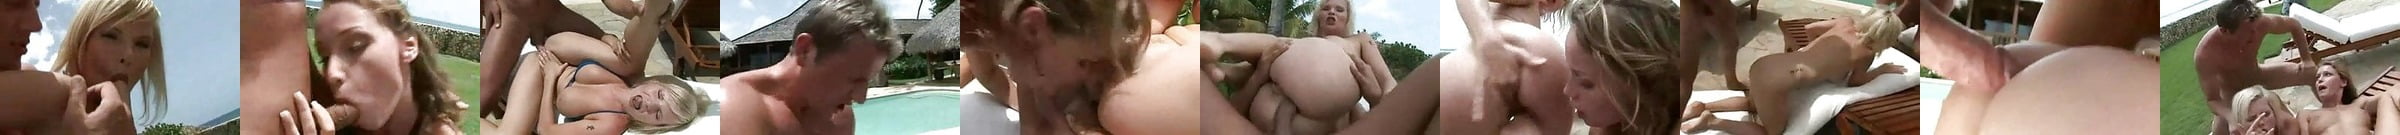 Featured Vacation Sex Porn Videos 2 Xhamster